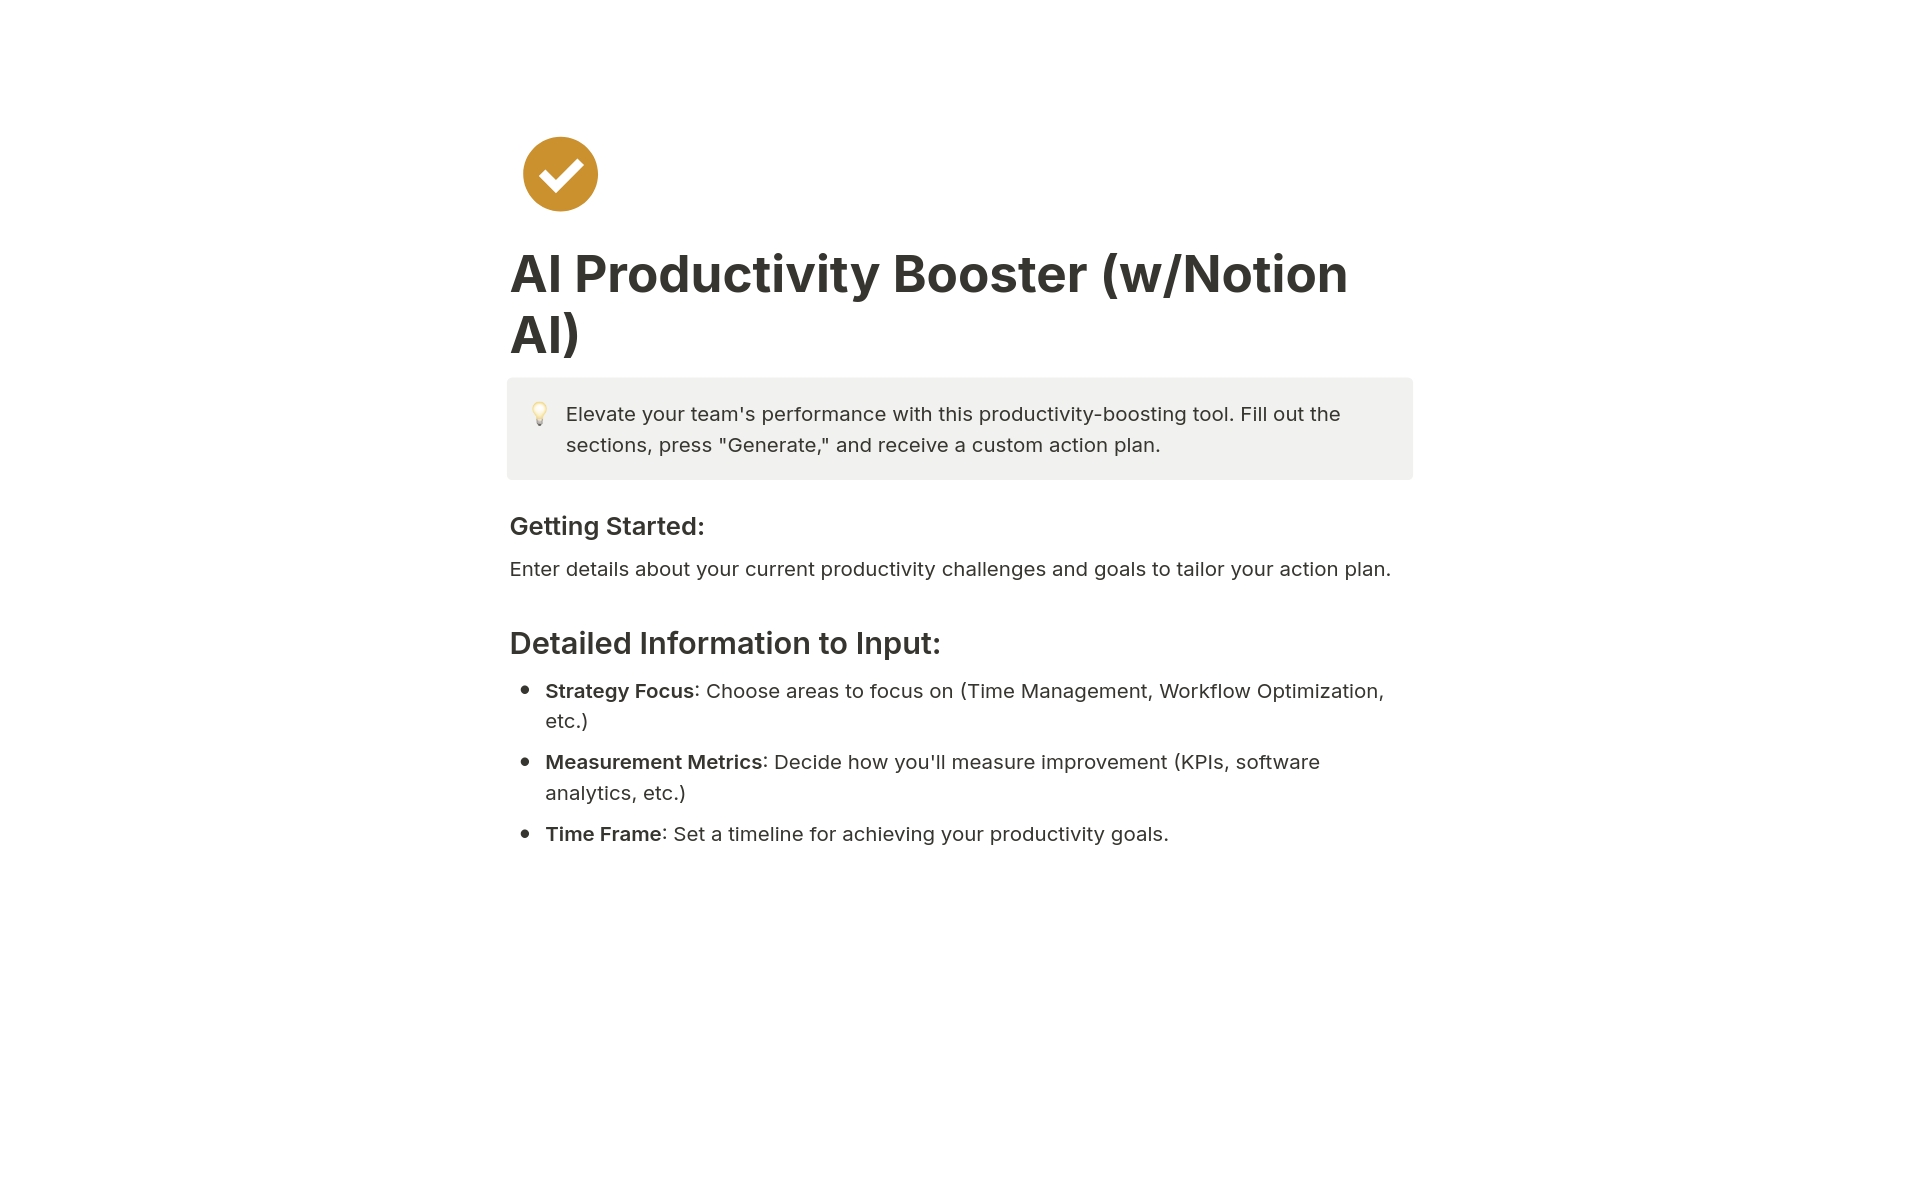 Optimize your team's output with the AI Productivity Booster template. Identify challenges, set goals, and align resources to streamline workflow and enhance efficiency.